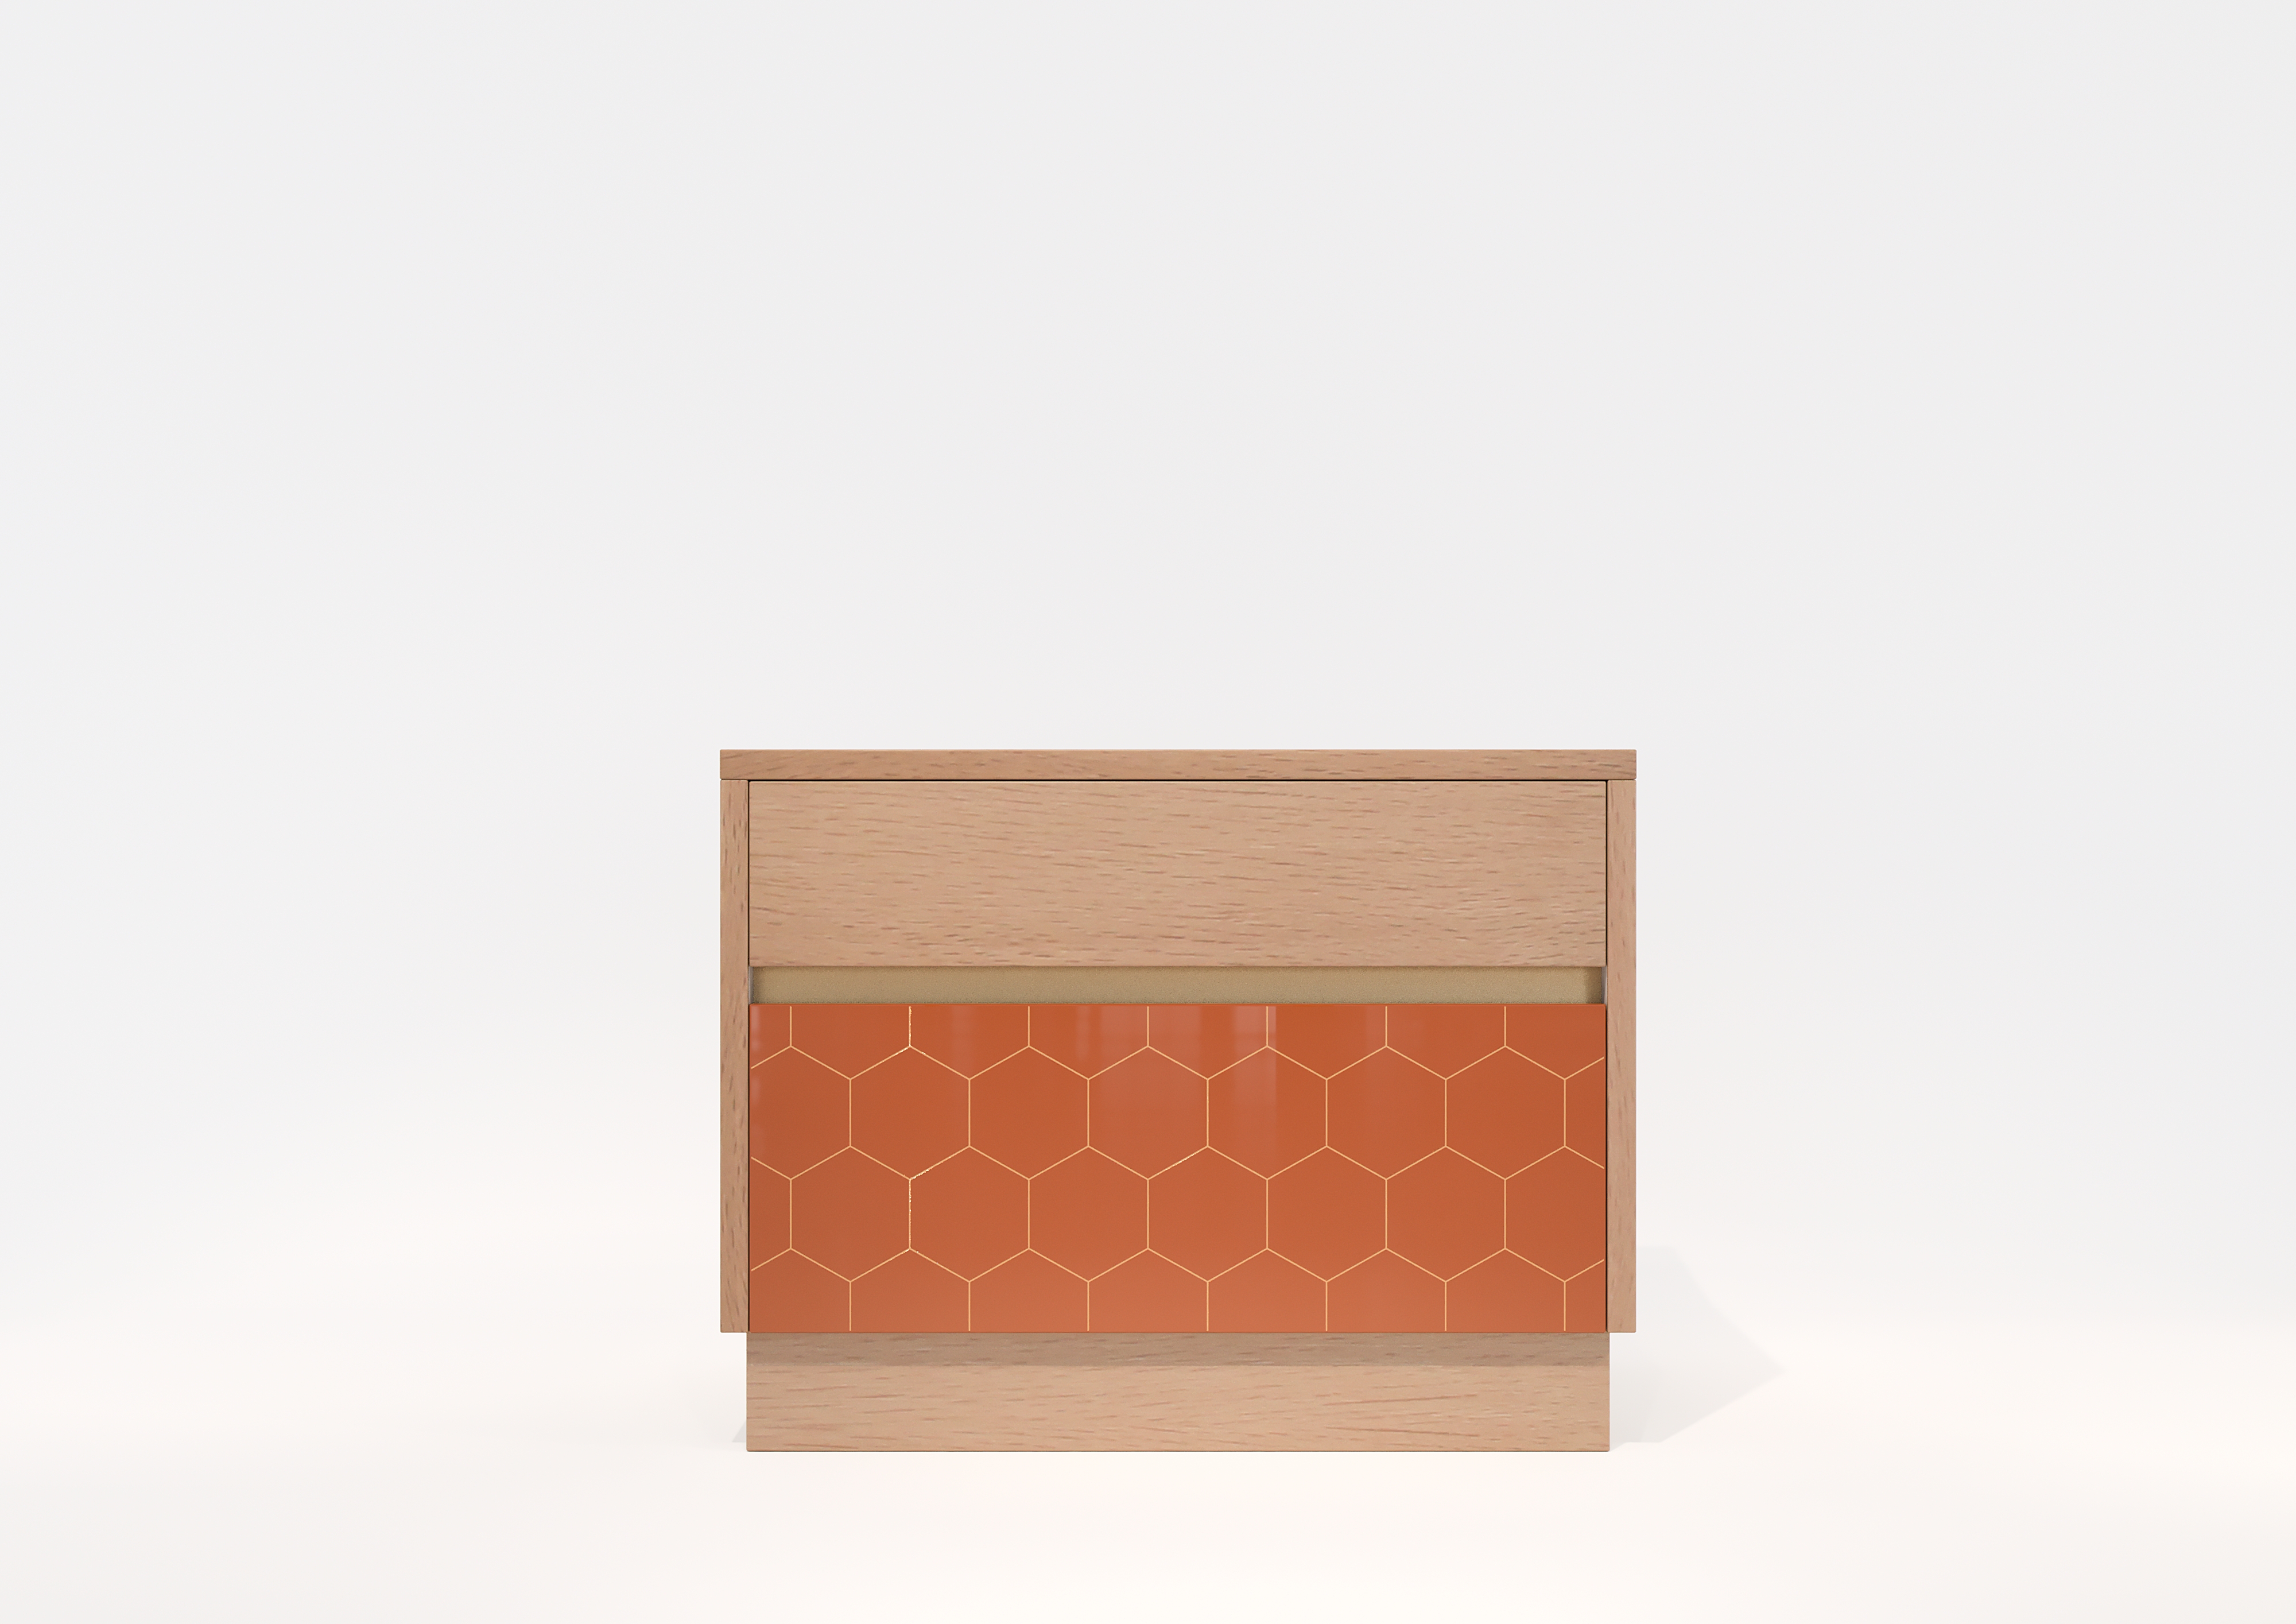 Downing Nightstand V2 Wood Edition #02 – $3,255.00